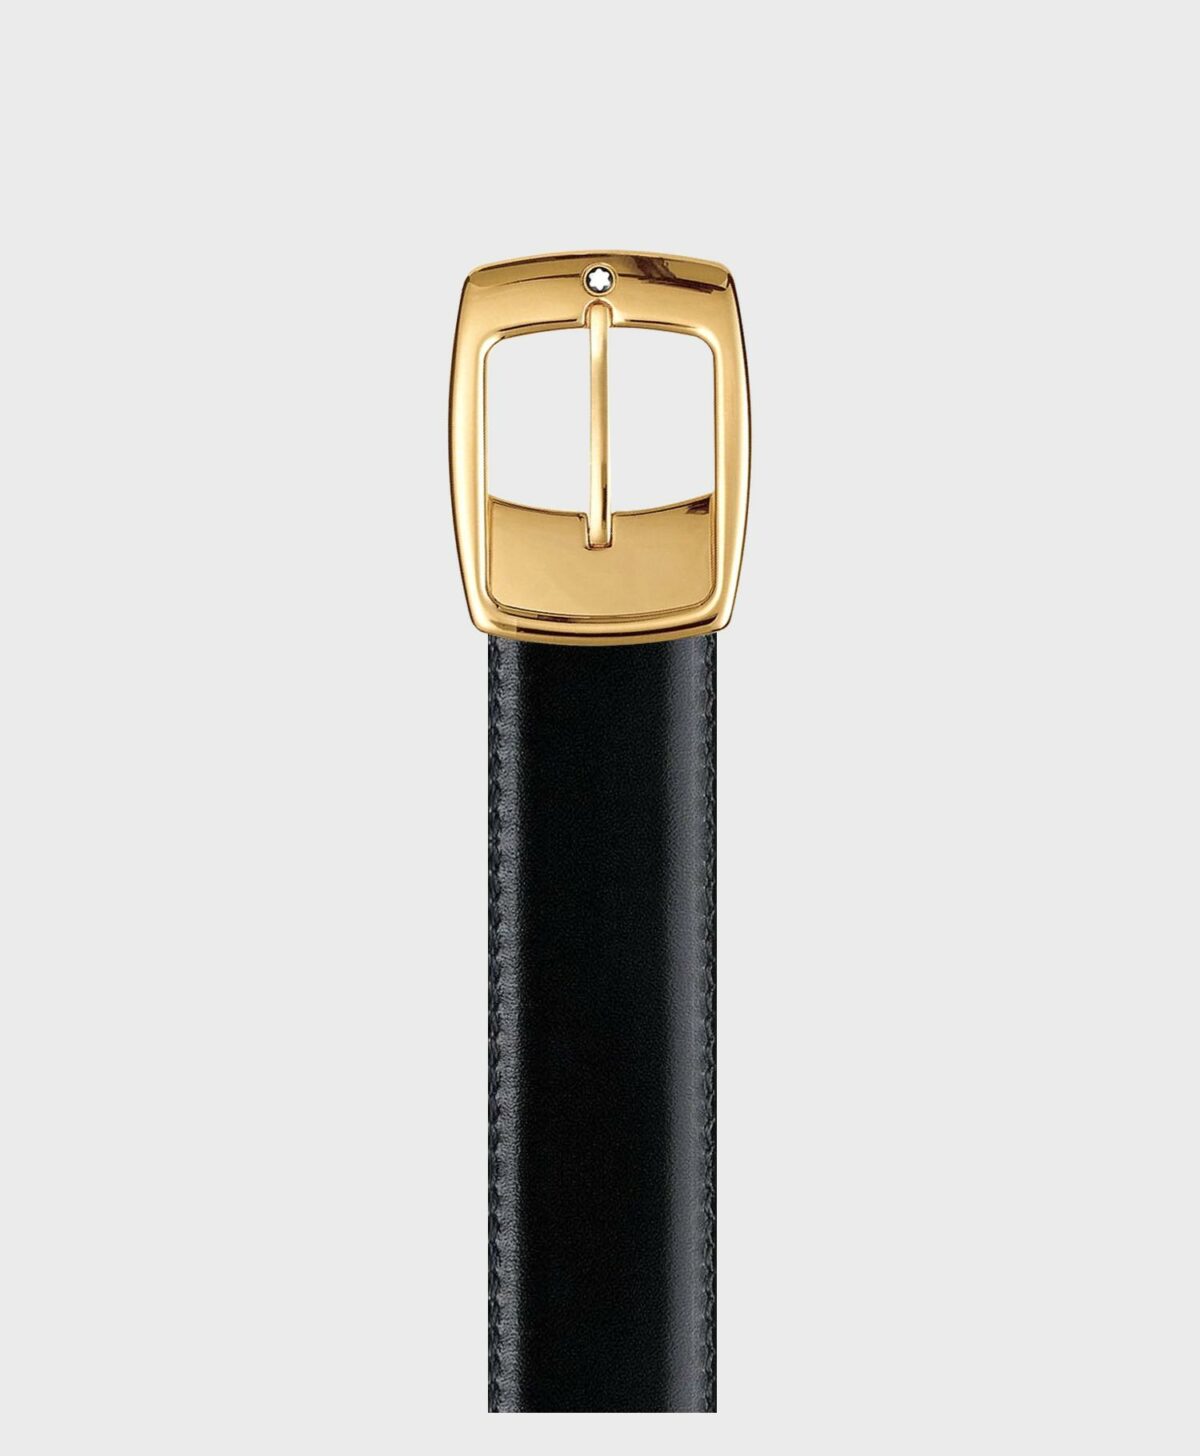 Thắt lưng Montblanc mạ vàng / Montblanc Reversible Gold Coated Buckle-Black/Brown Leather Classic Belt 30mm MB5562